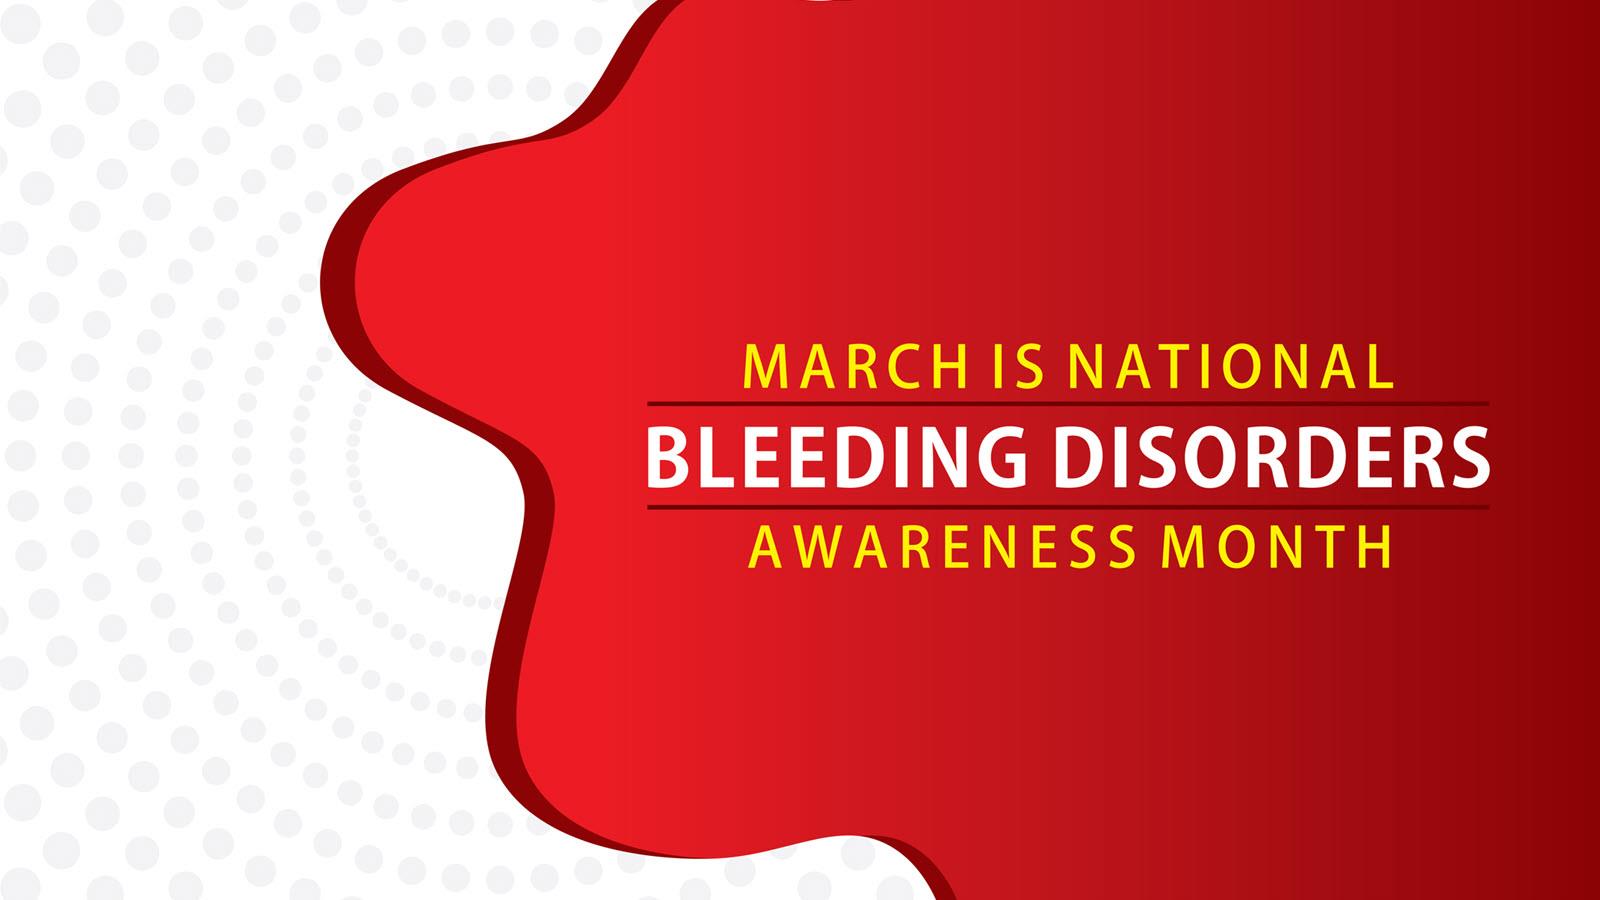 March is National Bleeding Disorders Awareness Month